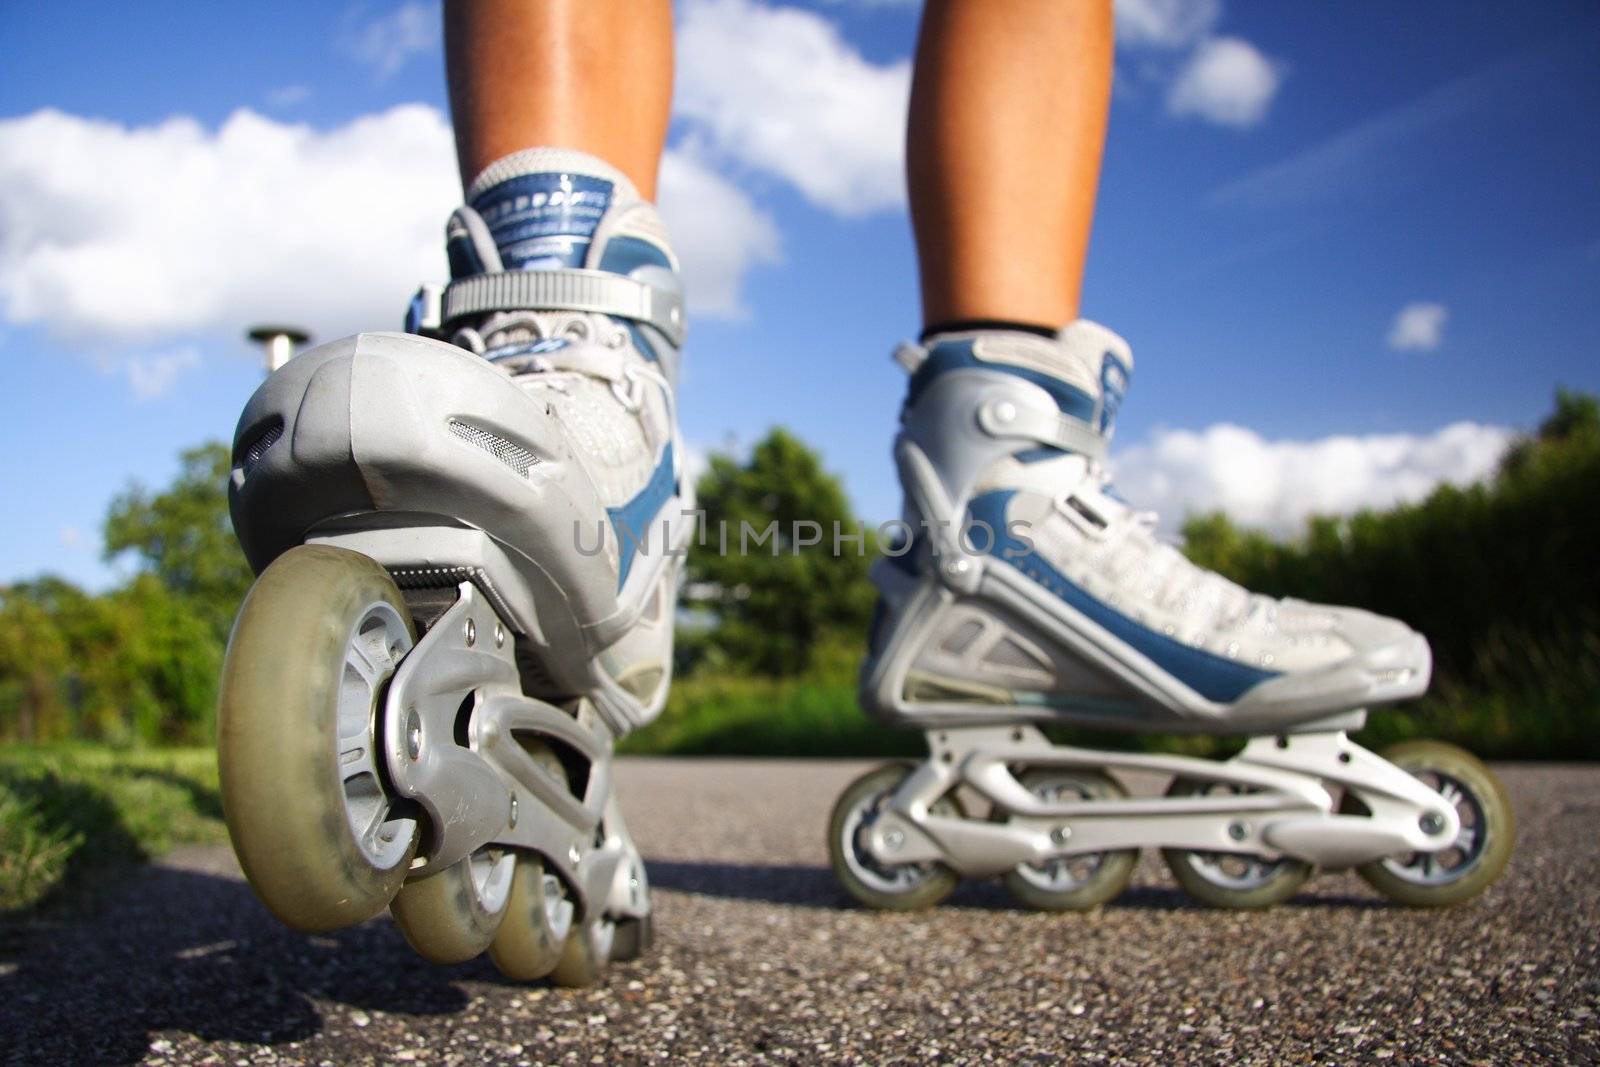 Inline skates in action closeup. Shallow depth of field, focus on left skate.